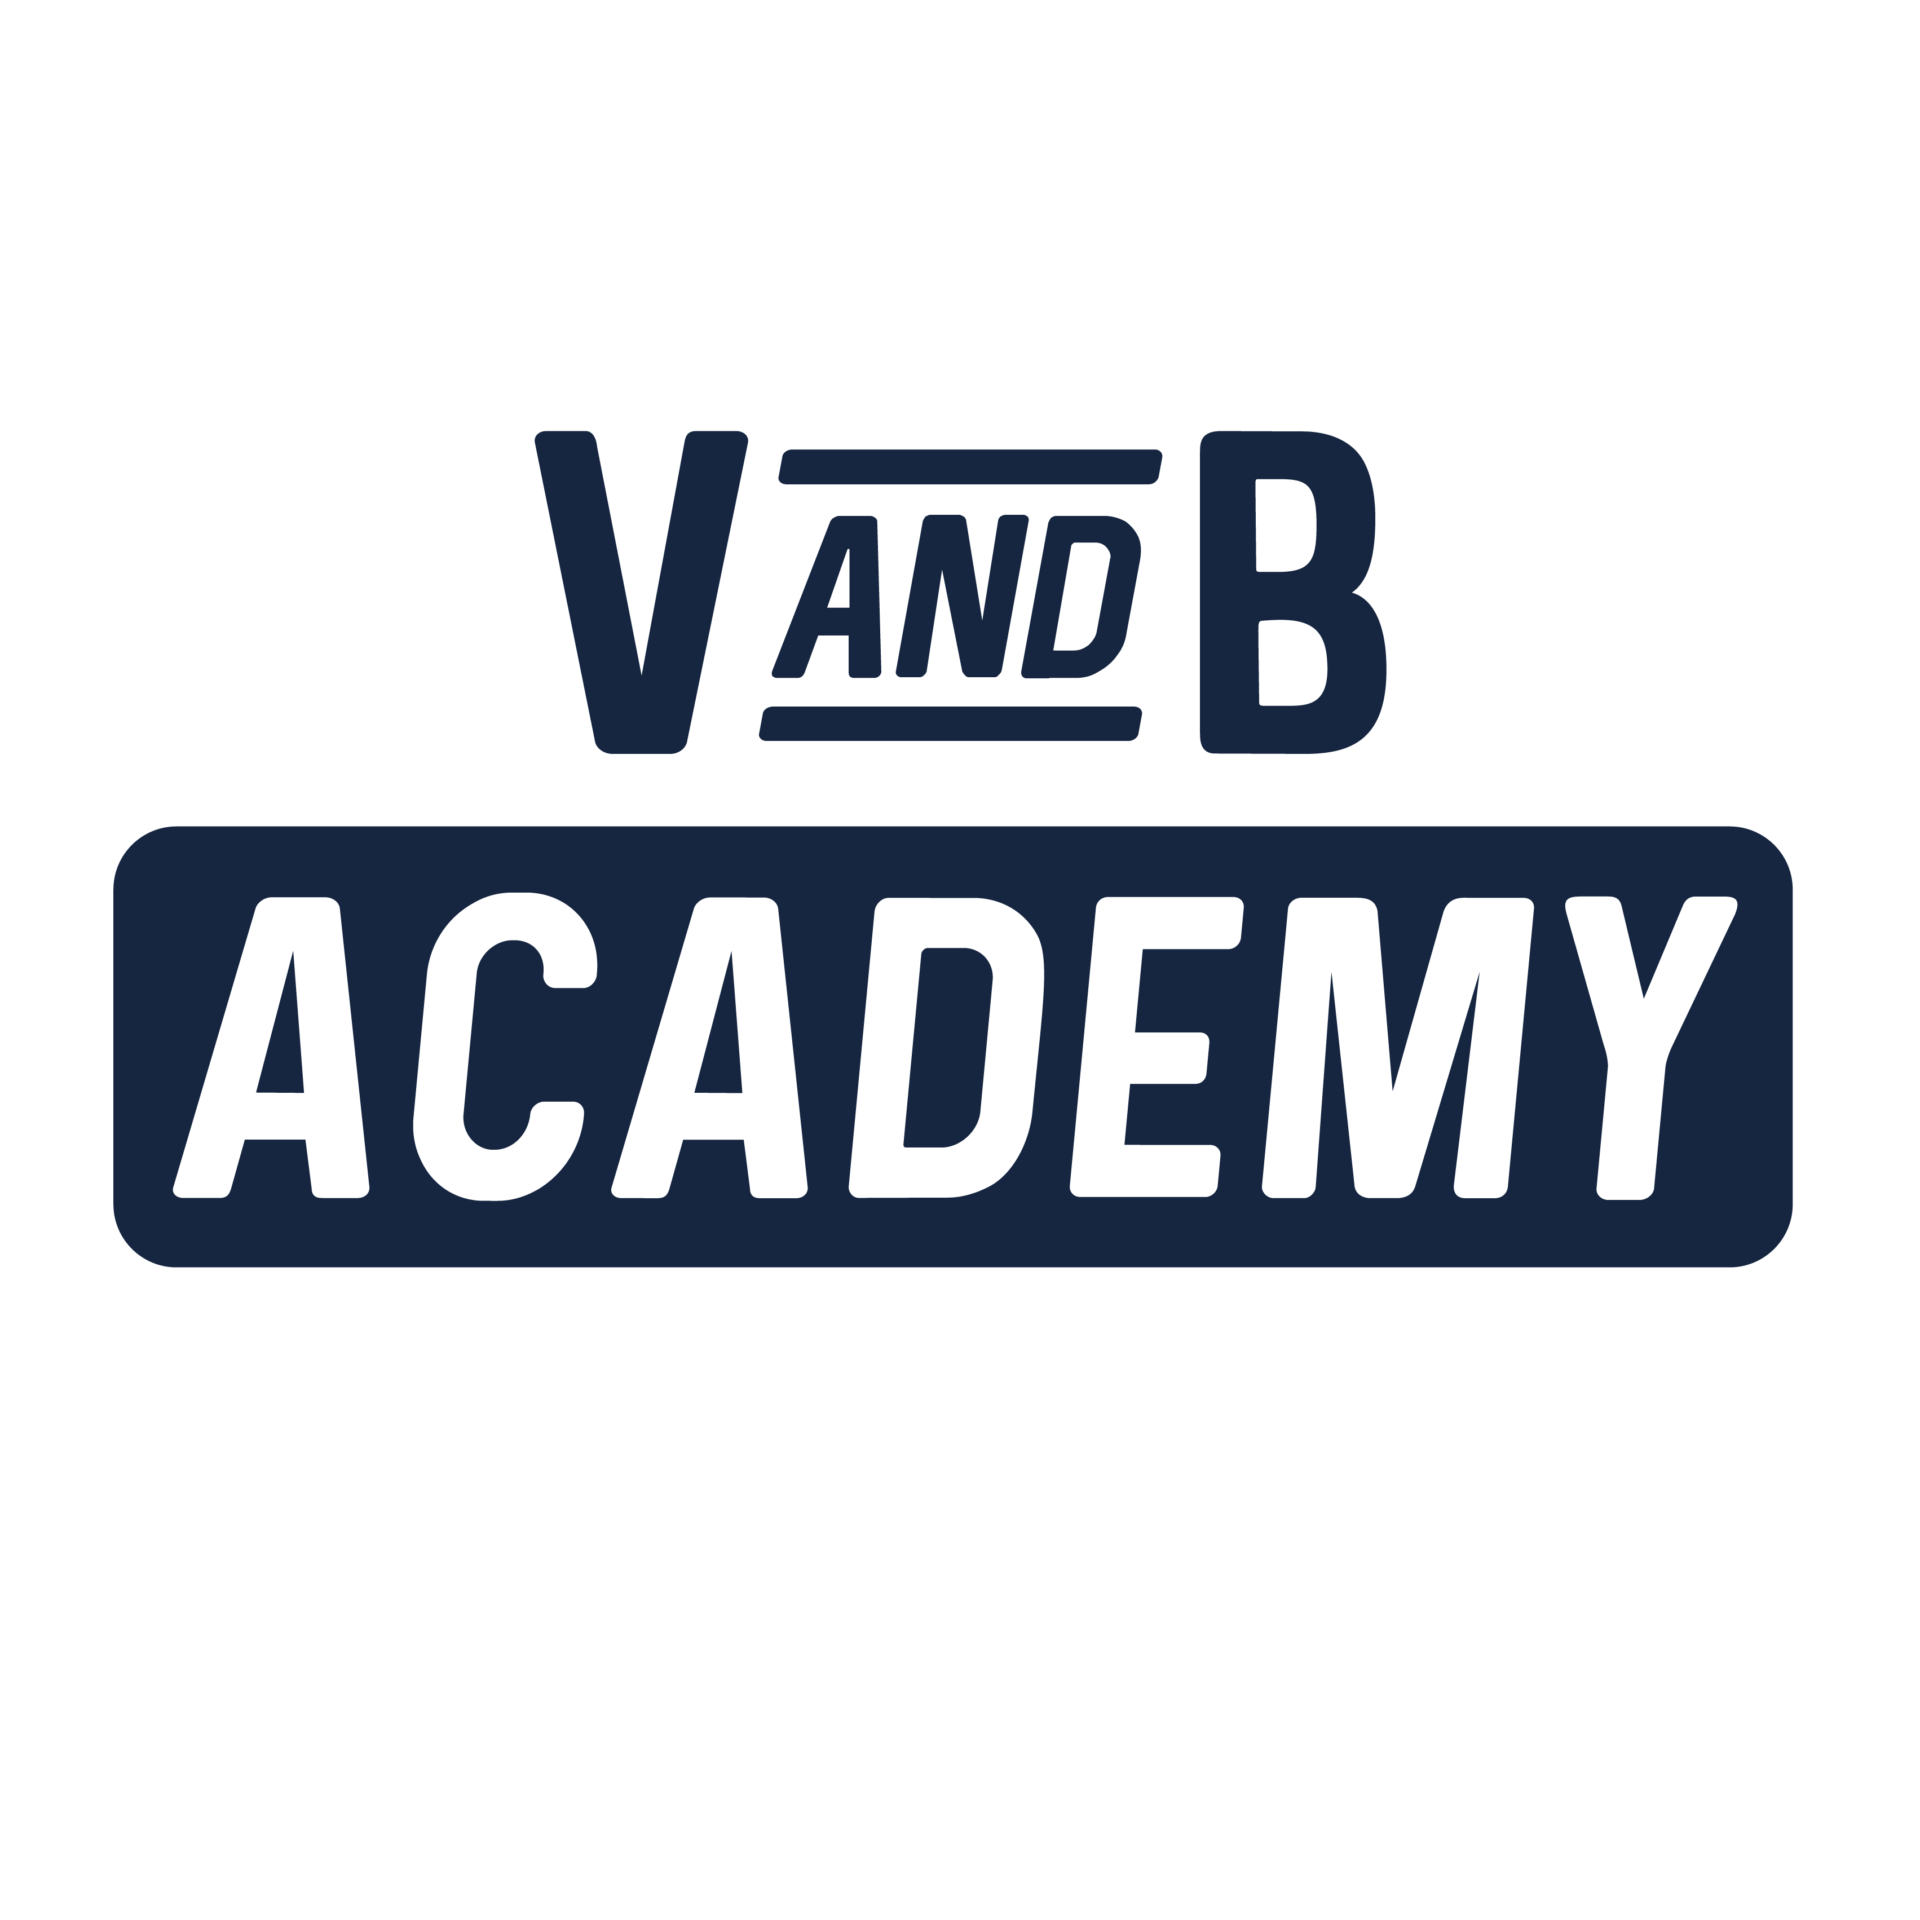 Logo V and B academy couleur